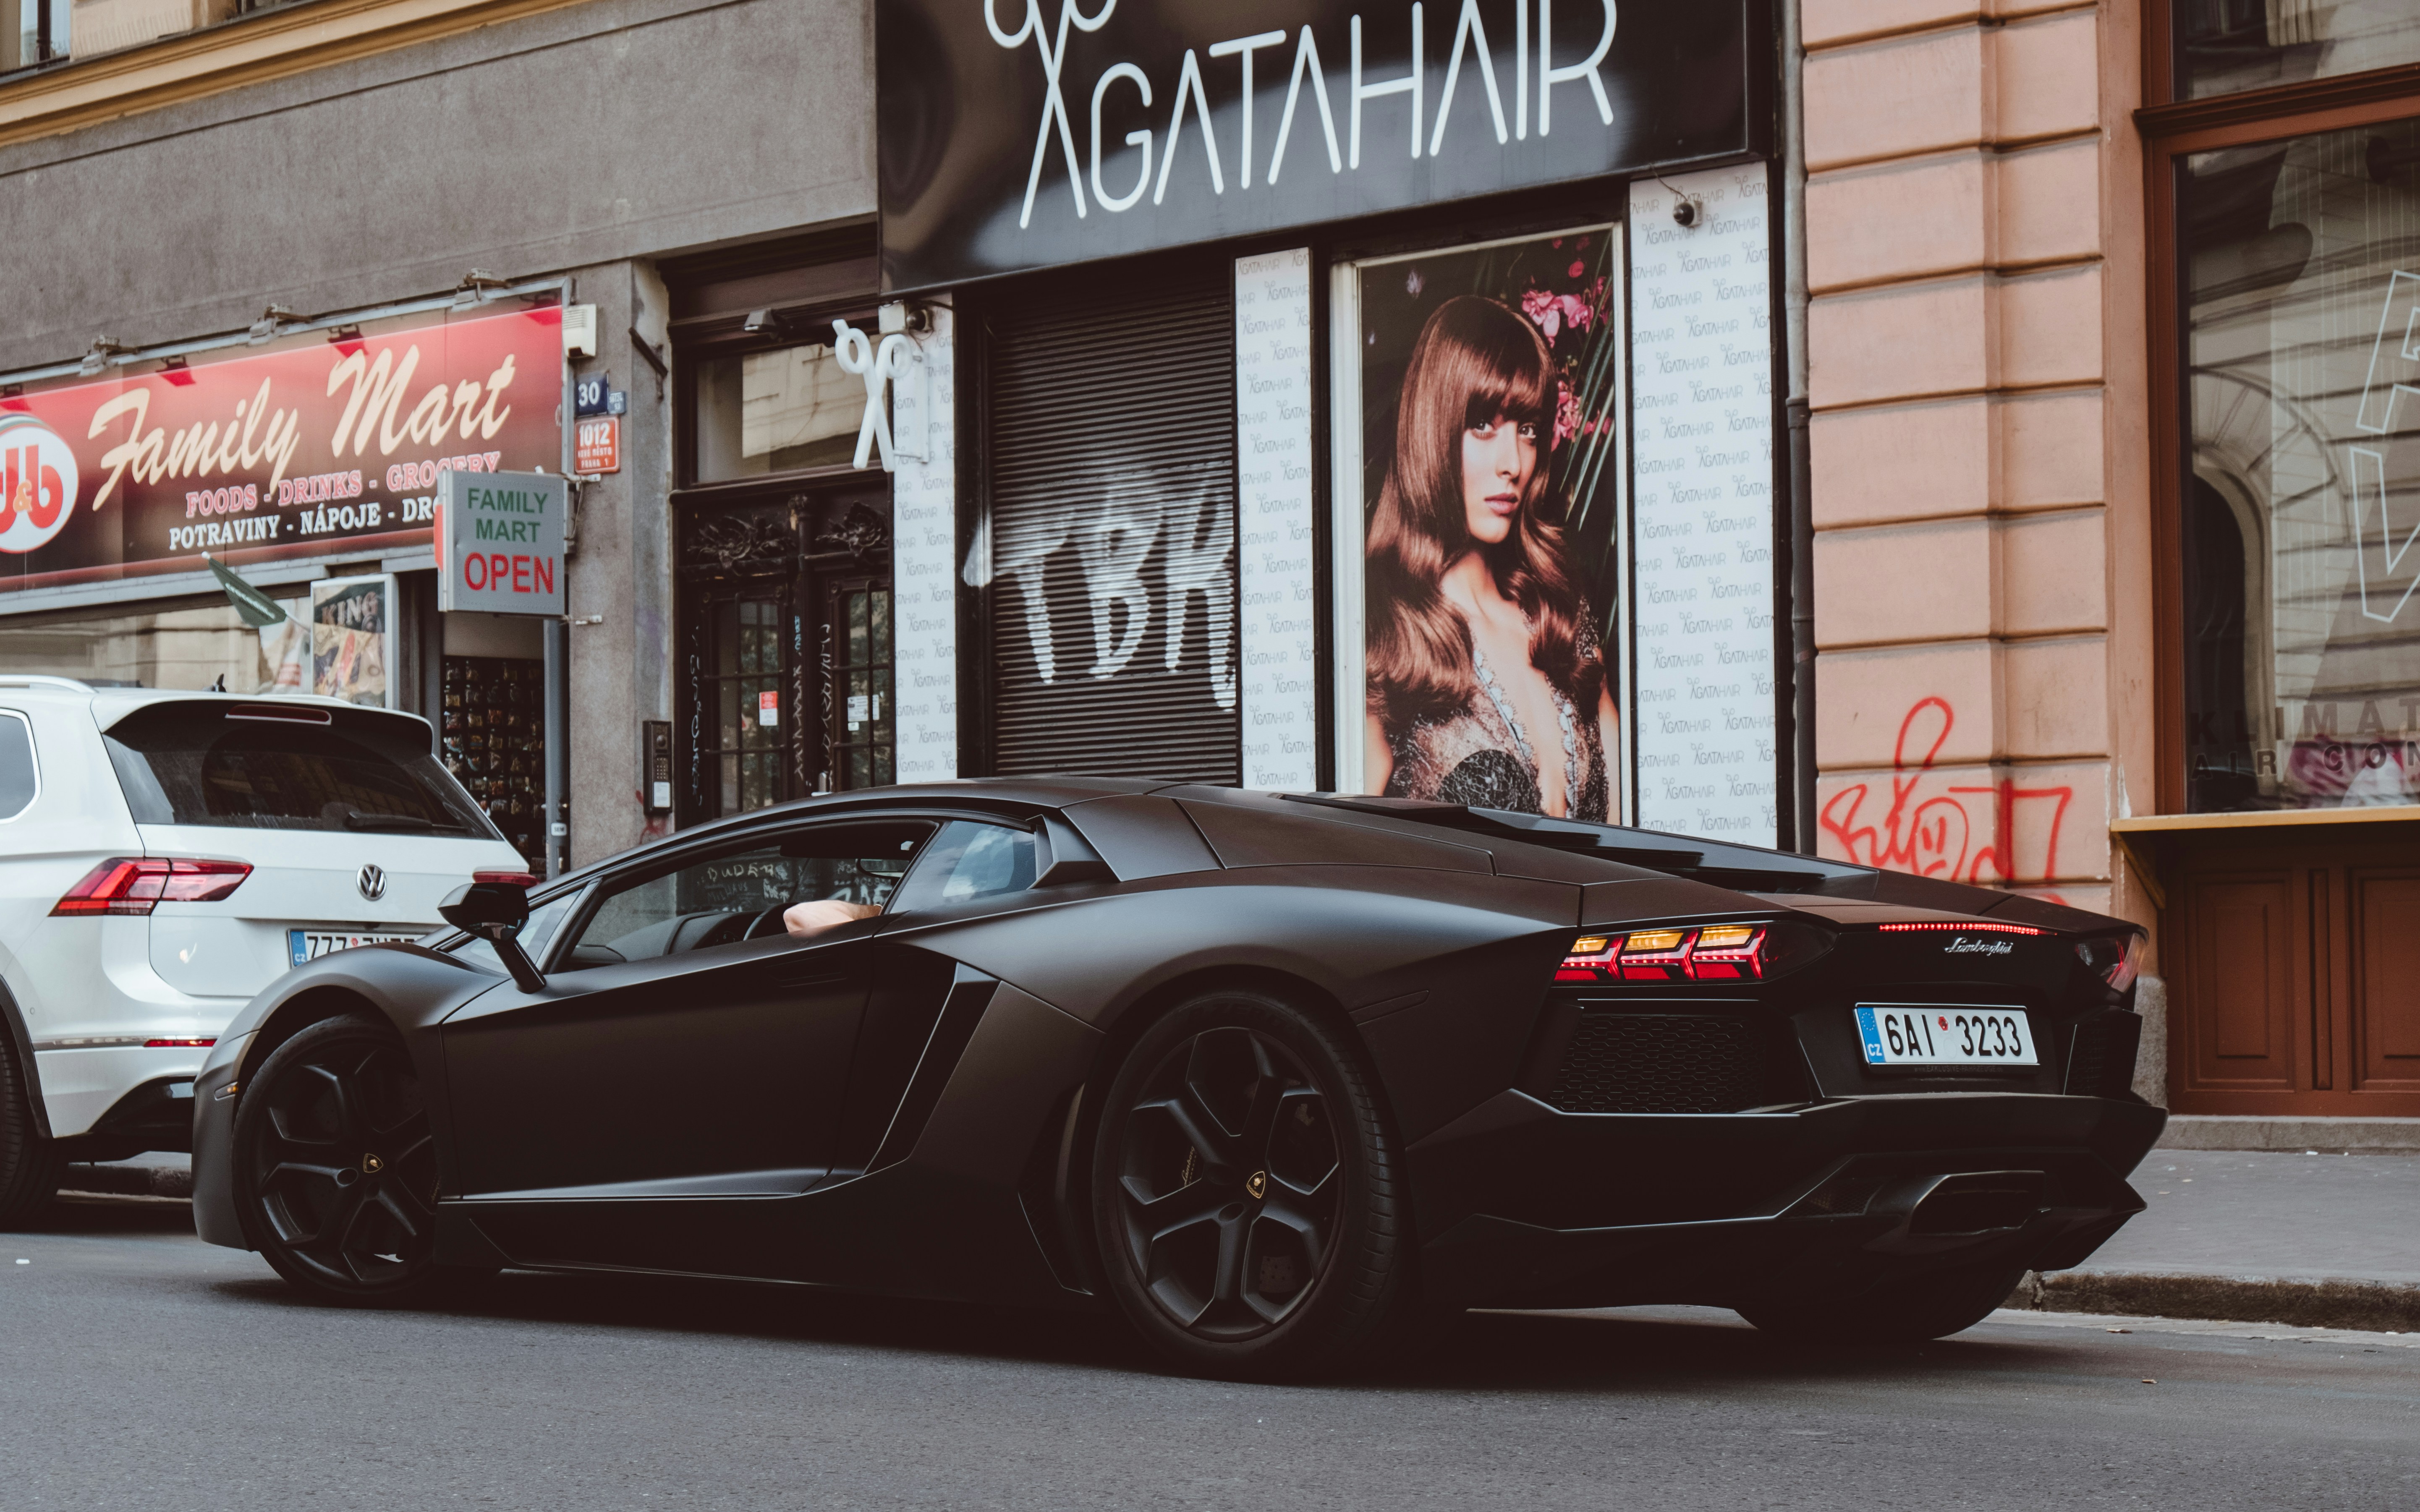 Matte black Lamborghini Aventador. I heard this very loud car coming from quite a distance, what a great sound! This is one of my favorite cars and I love the combination of the matt black color and the black rims. It gives this car such an aggressive look. Saw this last weekend in Prague, Czech Republic.